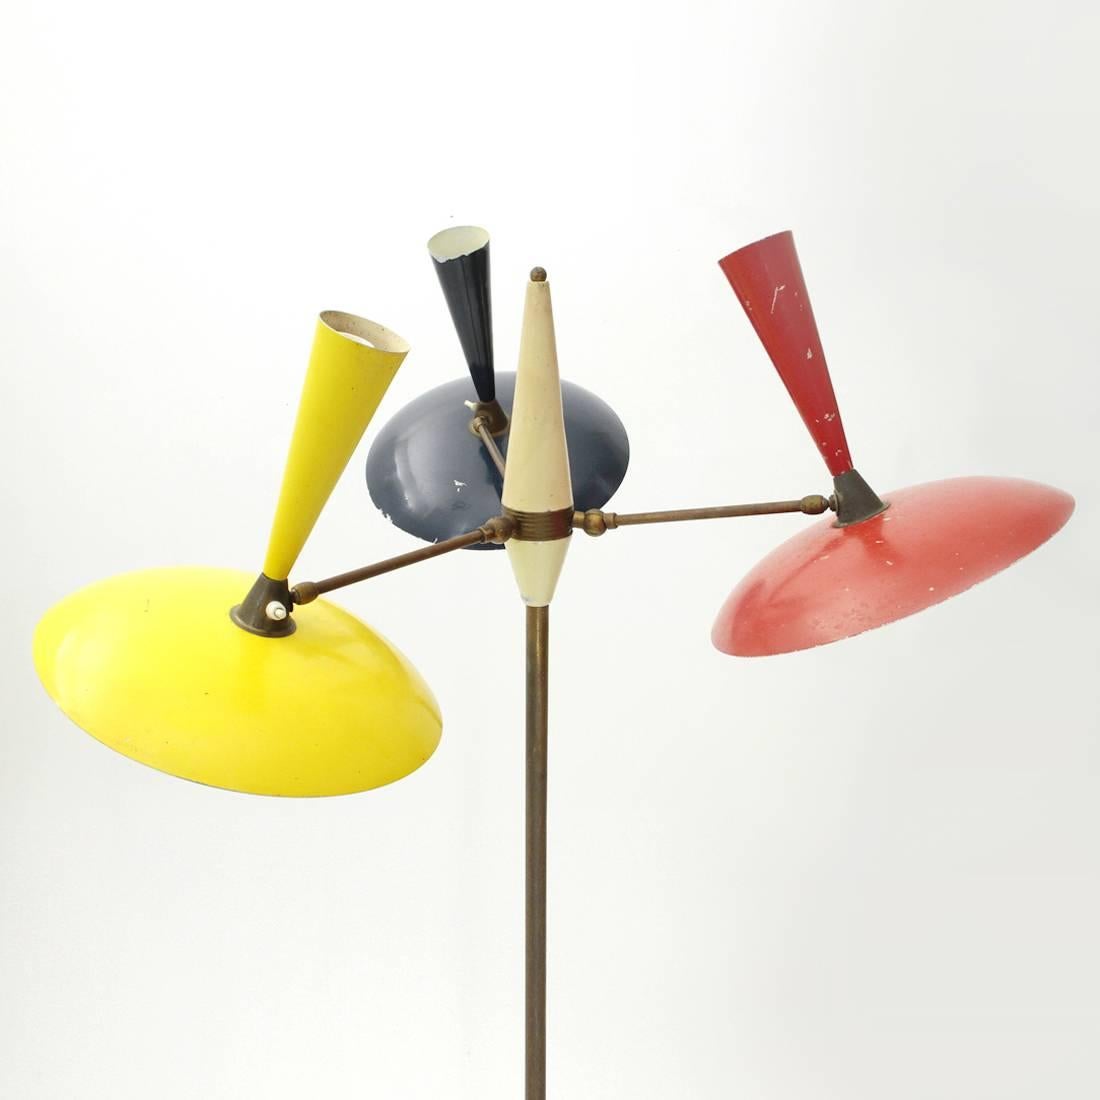 Floor lamp produced in the 1950s.
Iron base, covered in aluminium colored green water.
Stem and arms in brass.
Handle in red painted metal.
Aluminium shades colored in yellow, red and blue.
Switch for each arm.
Structure in good condition,